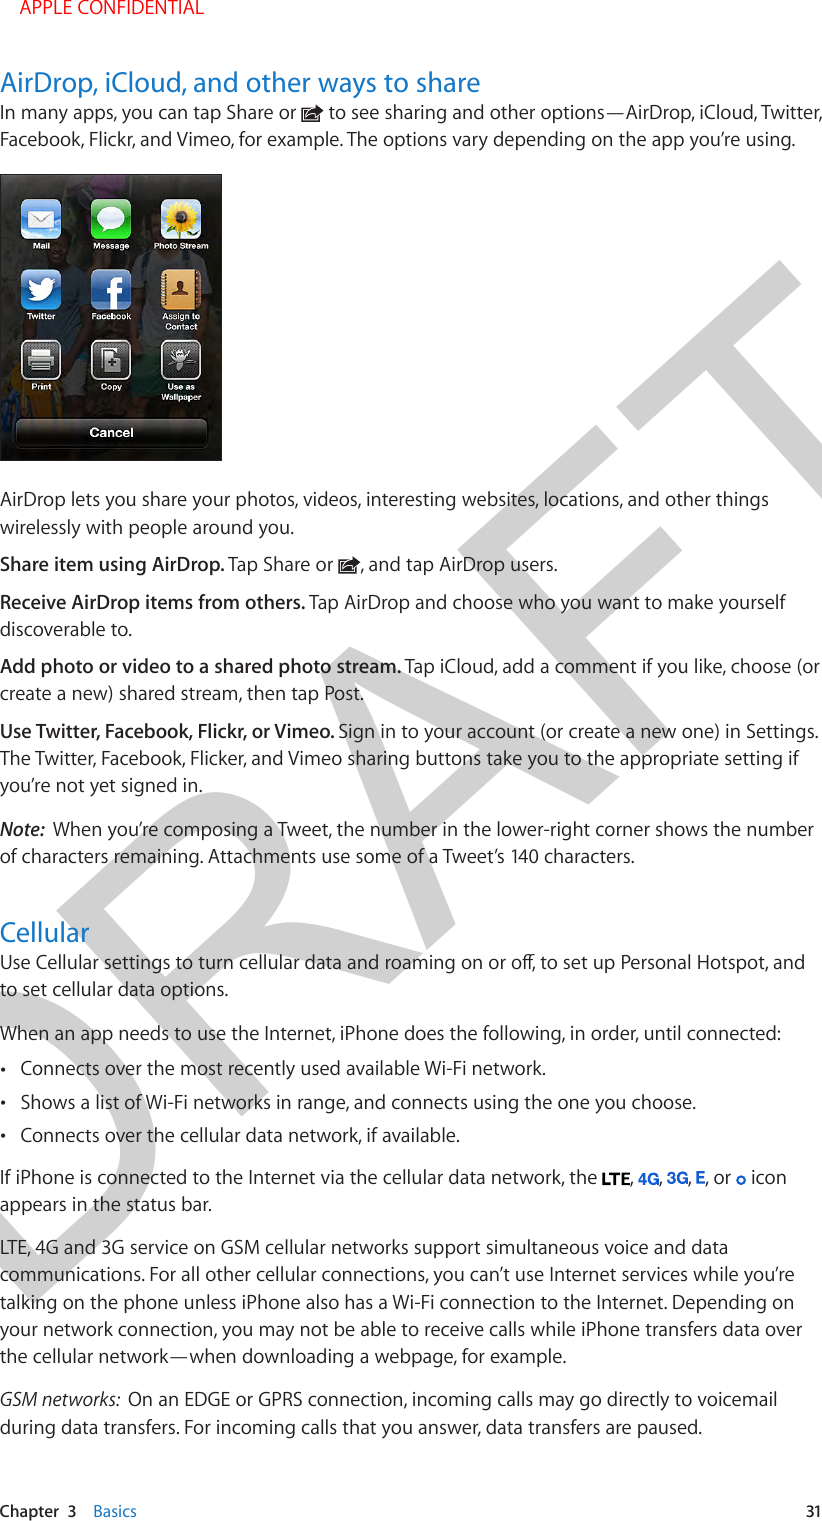 DRAFTChapter  3    Basics  31AirDrop, iCloud, and other ways to shareIn many apps, you can tap Share or   to see sharing and other options—AirDrop, iCloud, Twitter, Facebook, Flickr, and Vimeo, for example. The options vary depending on the app you’re using.AirDrop lets you share your photos, videos, interesting websites, locations, and other things wirelessly with people around you. Share item using AirDrop. Tap Share or  , and tap AirDrop users.Receive AirDrop items from others. Tap AirDrop and choose who you want to make yourself discoverable to.Add photo or video to a shared photo stream. Tap iCloud, add a comment if you like, choose (or create a new) shared stream, then tap Post.Use Twitter, Facebook, Flickr, or Vimeo. Sign in to your account (or create a new one) in Settings. The Twitter, Facebook, Flicker, and Vimeo sharing buttons take you to the appropriate setting if you’re not yet signed in.Note:  When you’re composing a Tweet, the number in the lower-right corner shows the number of characters remaining. Attachments use some of a Tweet’s 140 characters.CellularUse Cellular settings to turn cellular data and roaming on or o, to set up Personal Hotspot, and to set cellular data options.When an app needs to use the Internet, iPhone does the following, in order, until connected: •Connects over the most recently used available Wi-Fi network. •Shows a list of Wi-Fi networks in range, and connects using the one you choose. •Connects over the cellular data network, if available.If iPhone is connected to the Internet via the cellular data network, the  ,  ,  ,  , or   icon appears in the status bar.LTE, 4G and 3G service on GSM cellular networks support simultaneous voice and data communications. For all other cellular connections, you can’t use Internet services while you’re talking on the phone unless iPhone also has a Wi-Fi connection to the Internet. Depending on your network connection, you may not be able to receive calls while iPhone transfers data over the cellular network—when downloading a webpage, for example.GSM networks:  On an EDGE or GPRS connection, incoming calls may go directly to voicemail during data transfers. For incoming calls that you answer, data transfers are paused.    APPLE CONFIDENTIAL